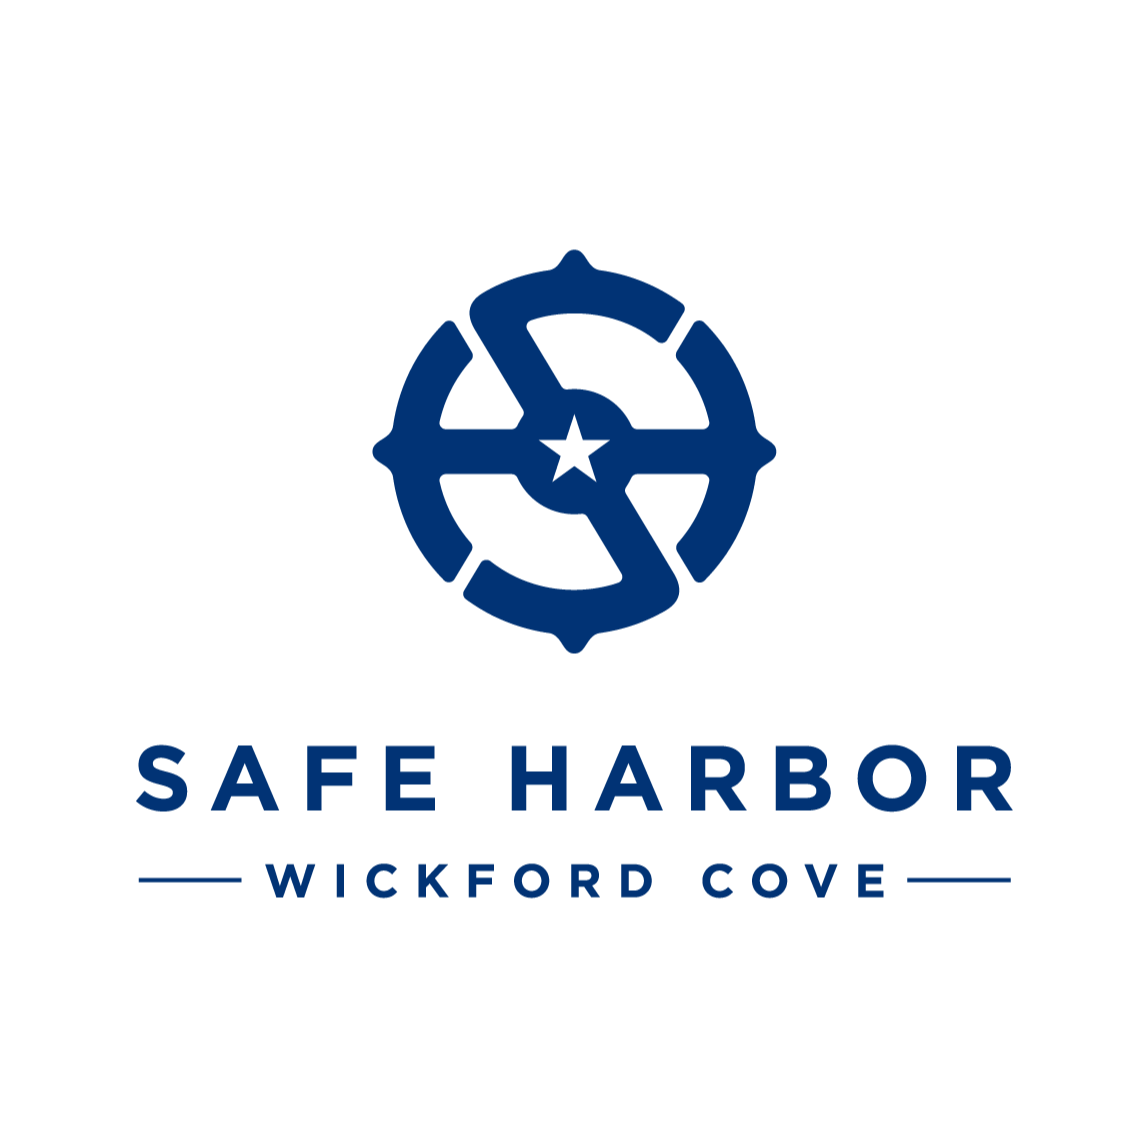 Safe Harbor Wickford Cove - North Kingstown, RI 02852 - (401)884-7014 | ShowMeLocal.com